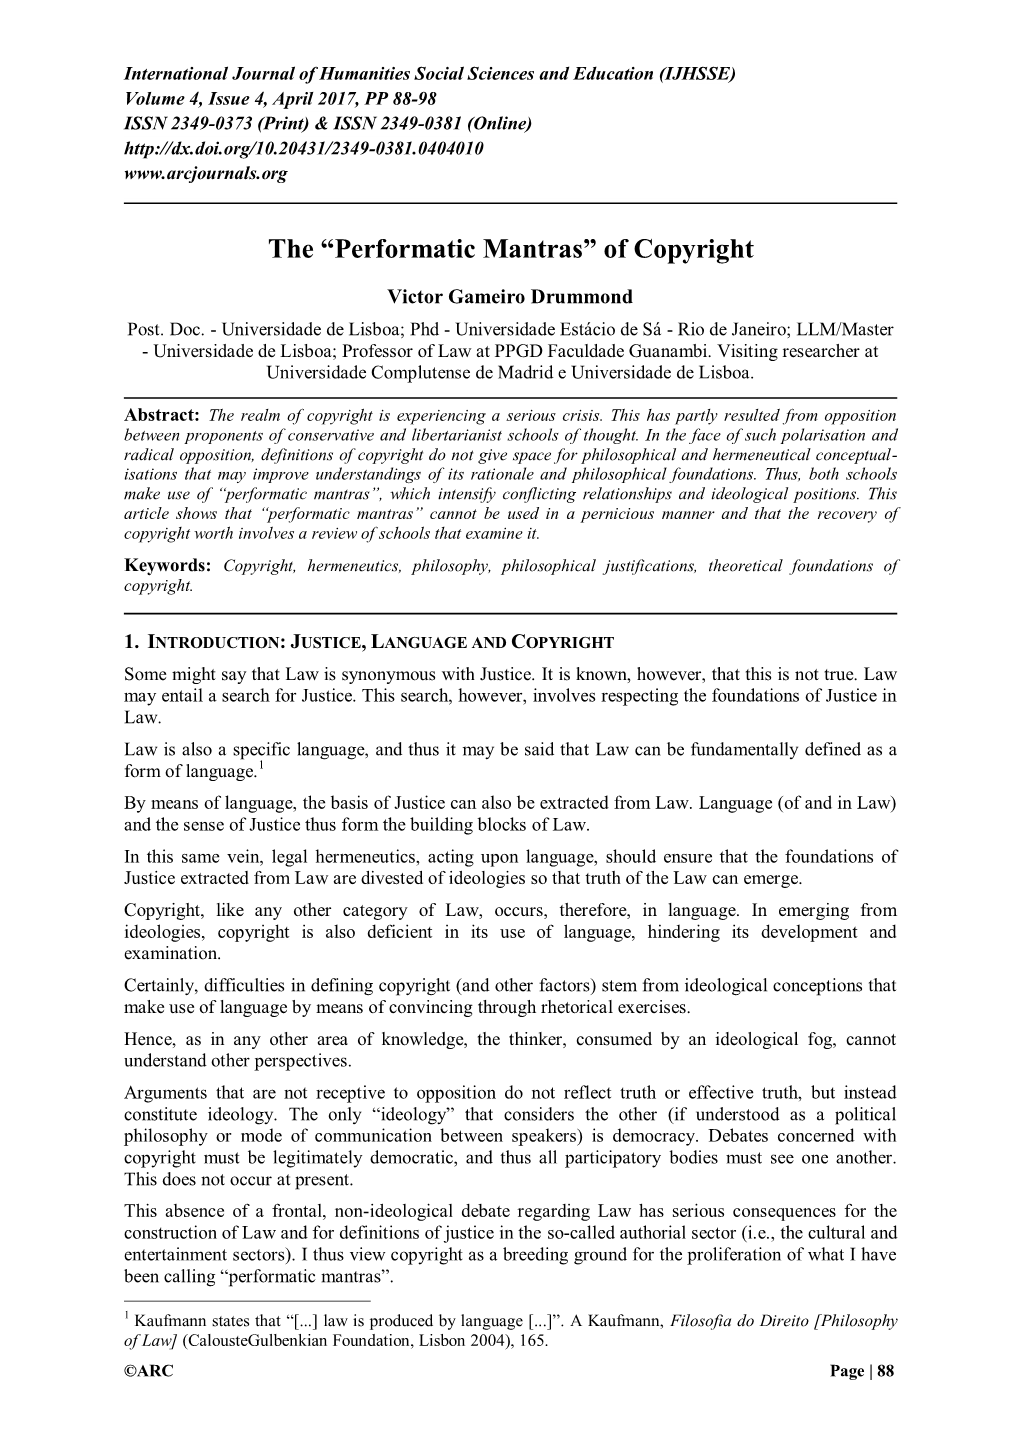 The “Performatic Mantras” of Copyright